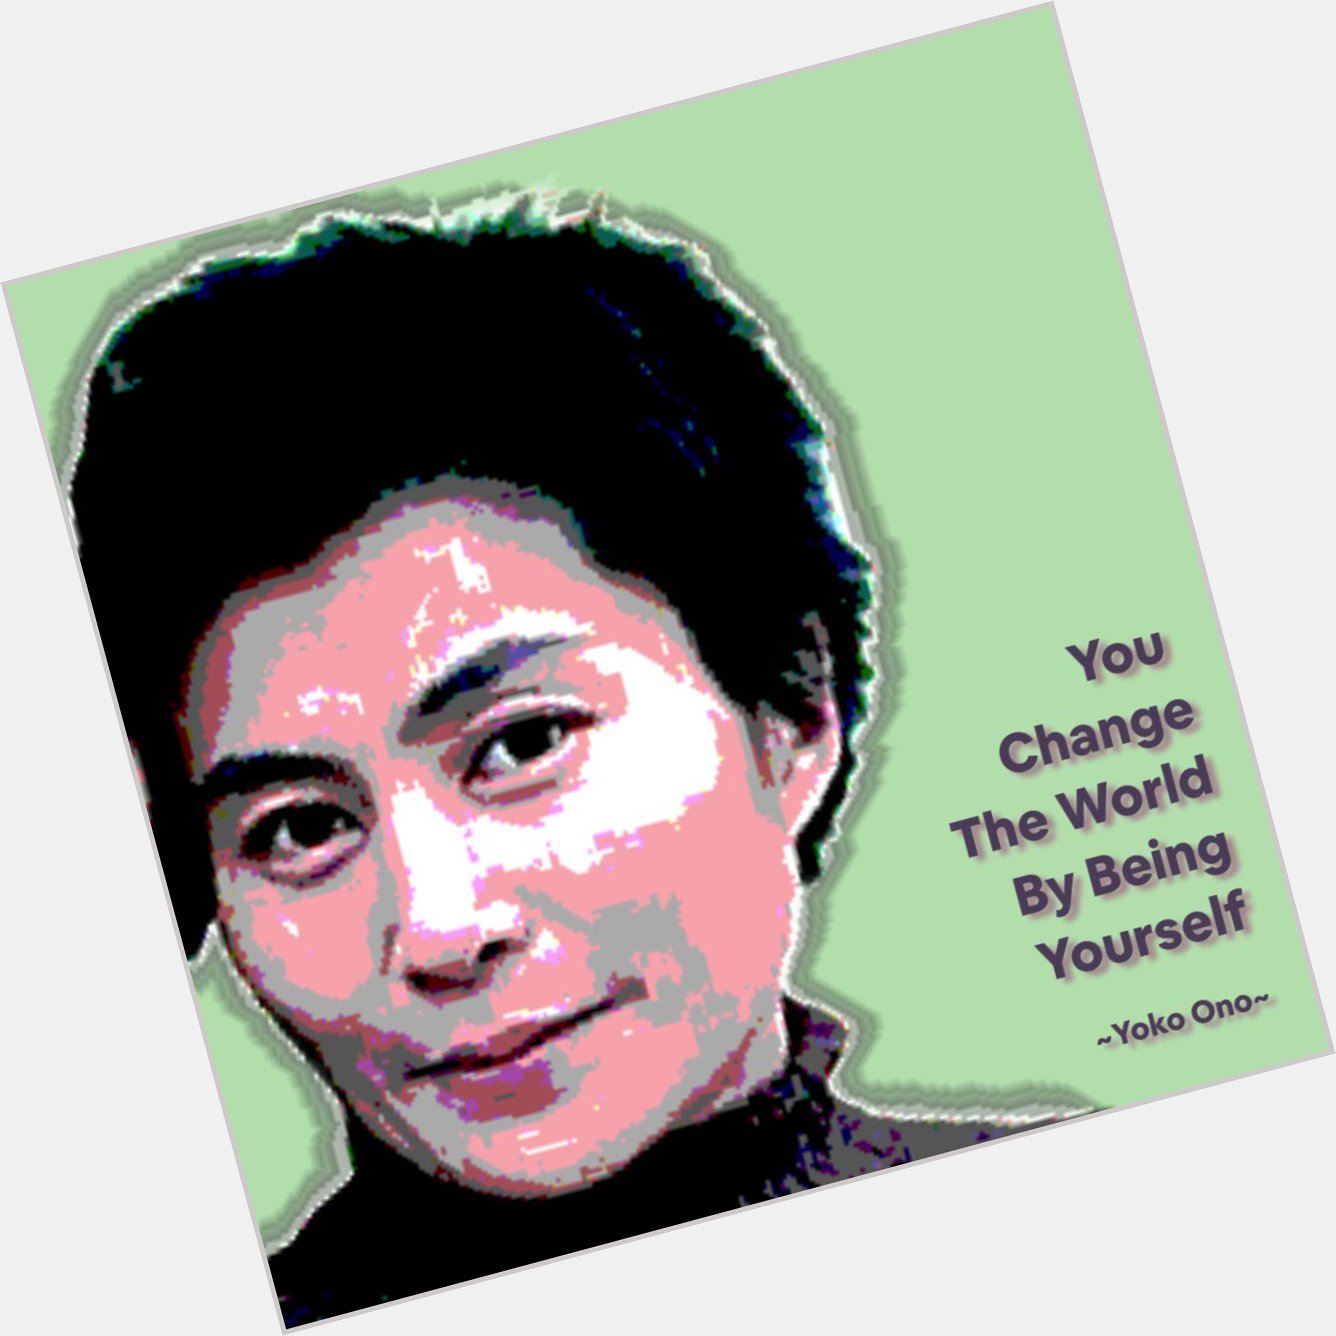 You change the world by being yourself
-Yoko Ono-
Happy Birthday The is now listed on 